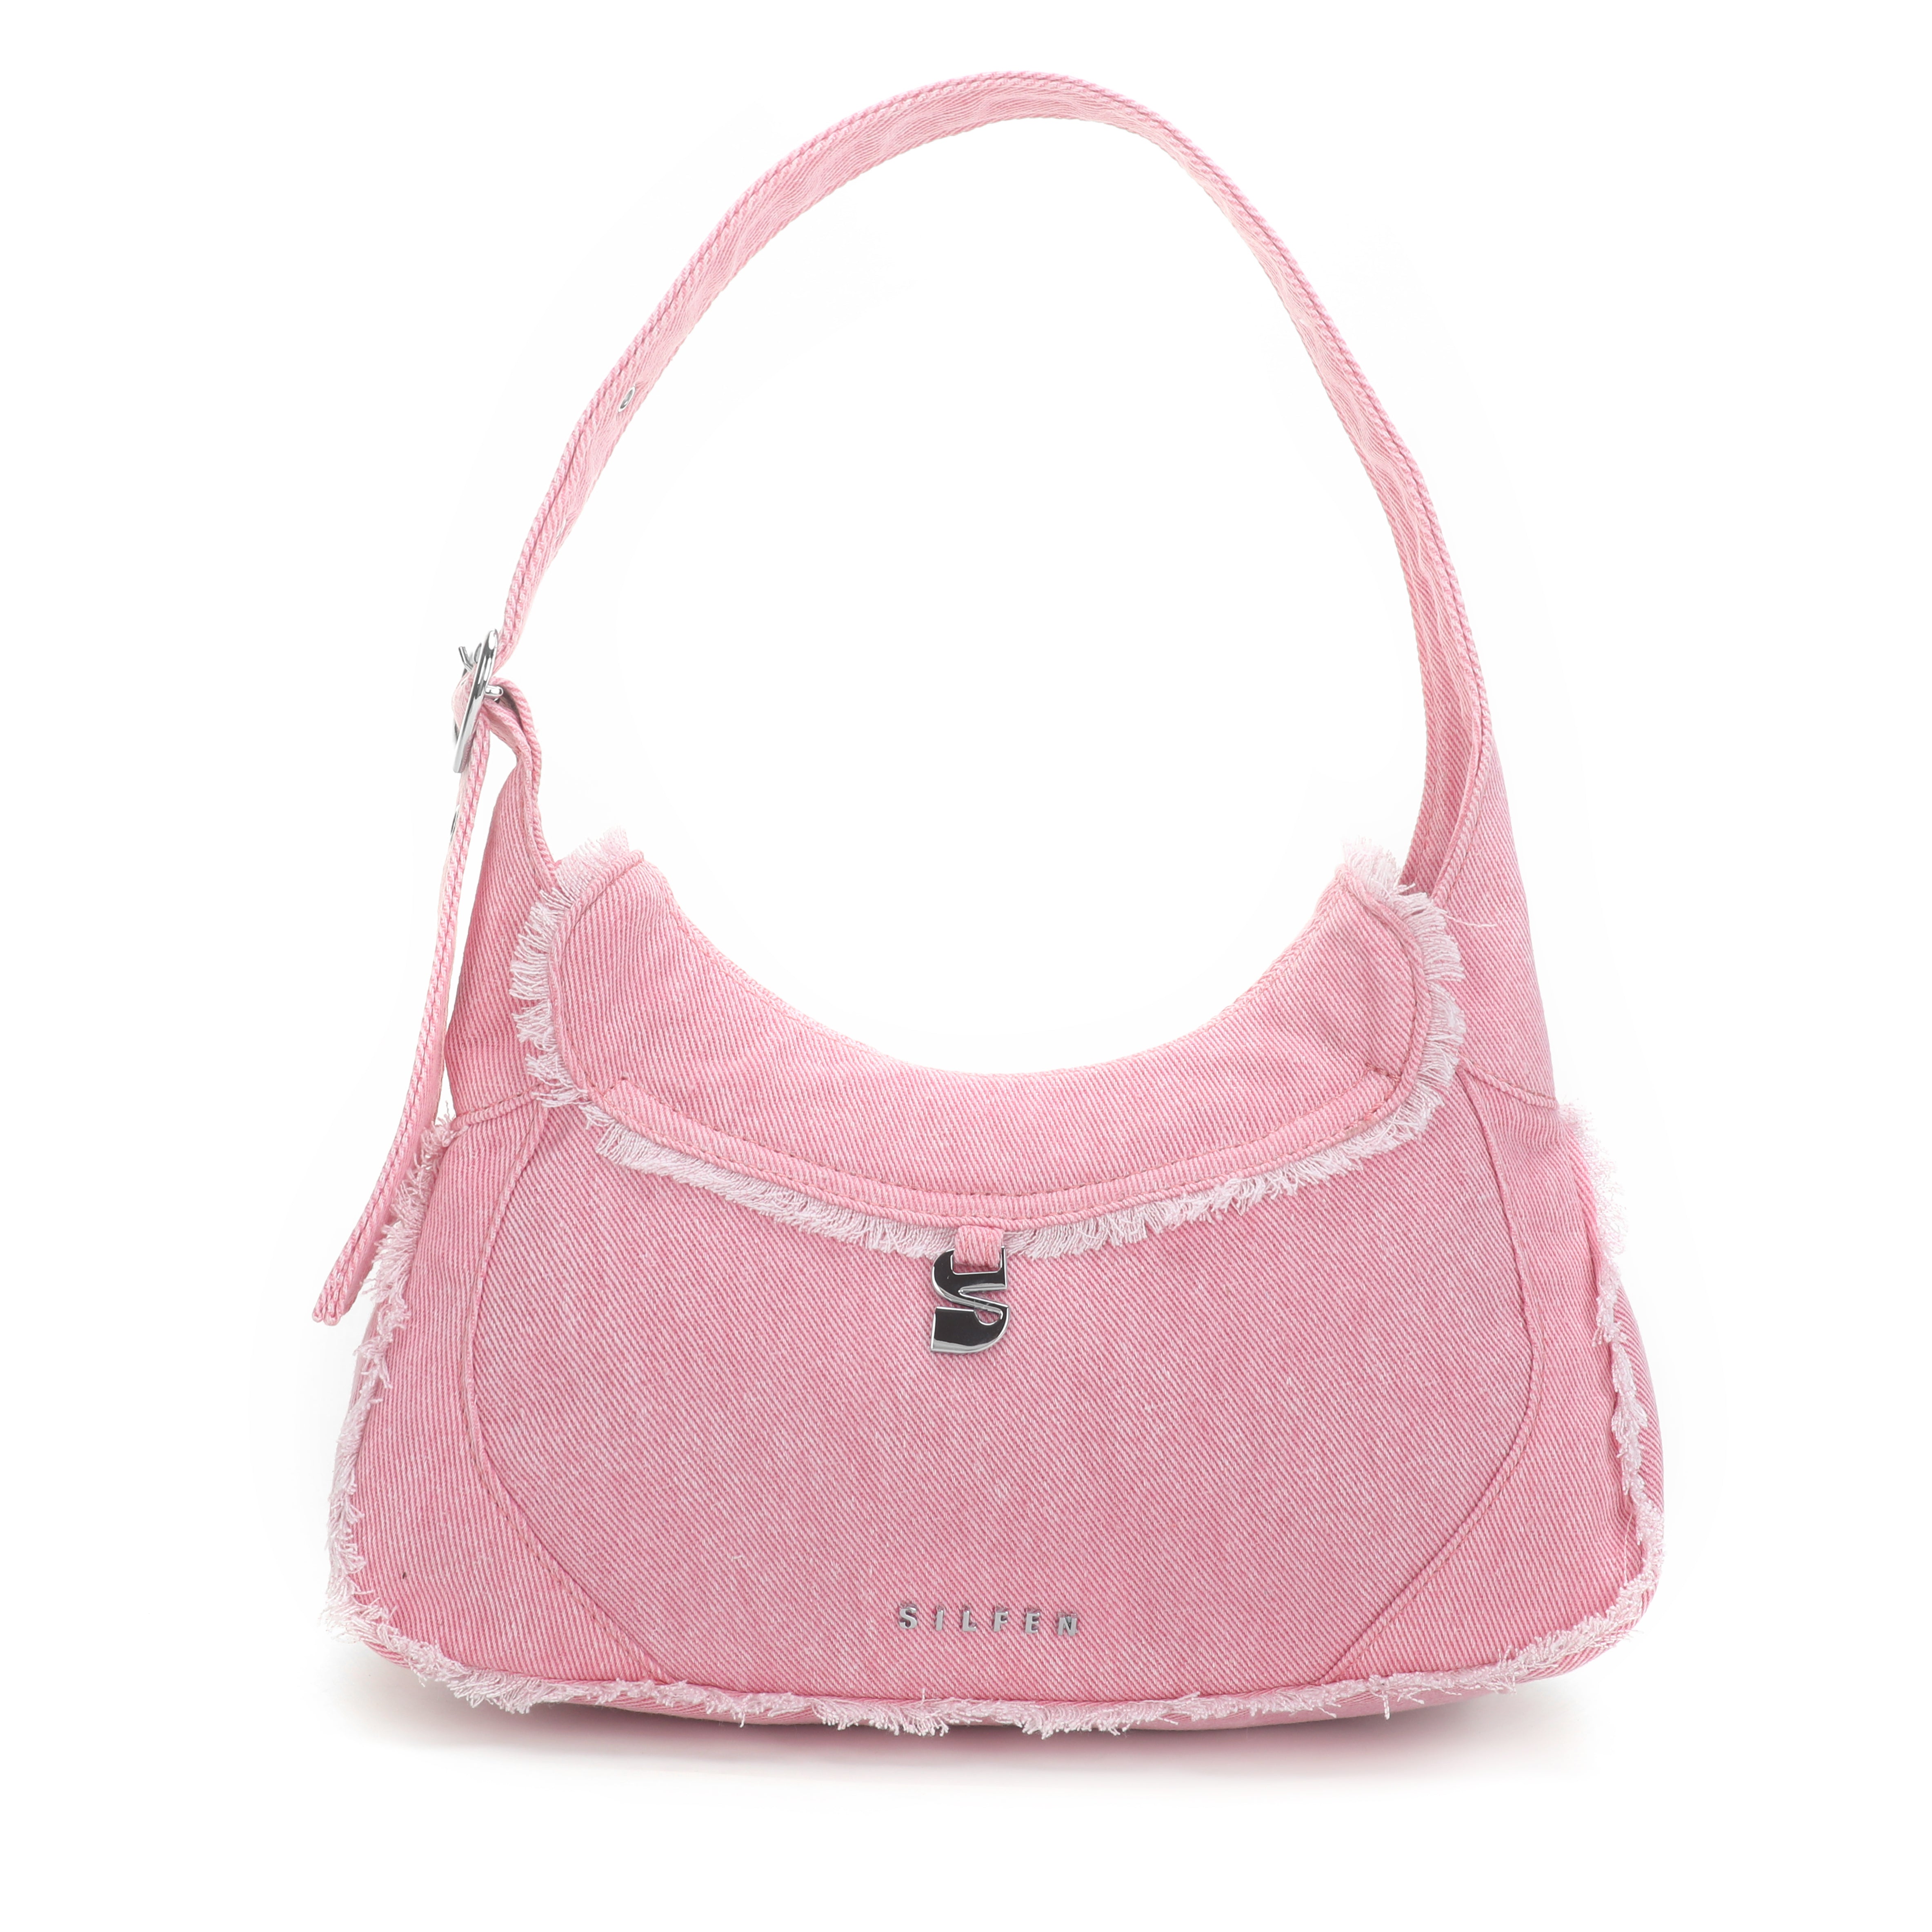 THE RECYCLED THEA SHOULDER BAG - PINK DENIM - EXCLUSIVE Bags from SILFEN - Just €79.99! SHOP NOW AT IAMINHATELOVE BOTH IN STORE FOR CYPRUS AND ONLINE WORLDWIDE @ IAMINHATELOVE.COM